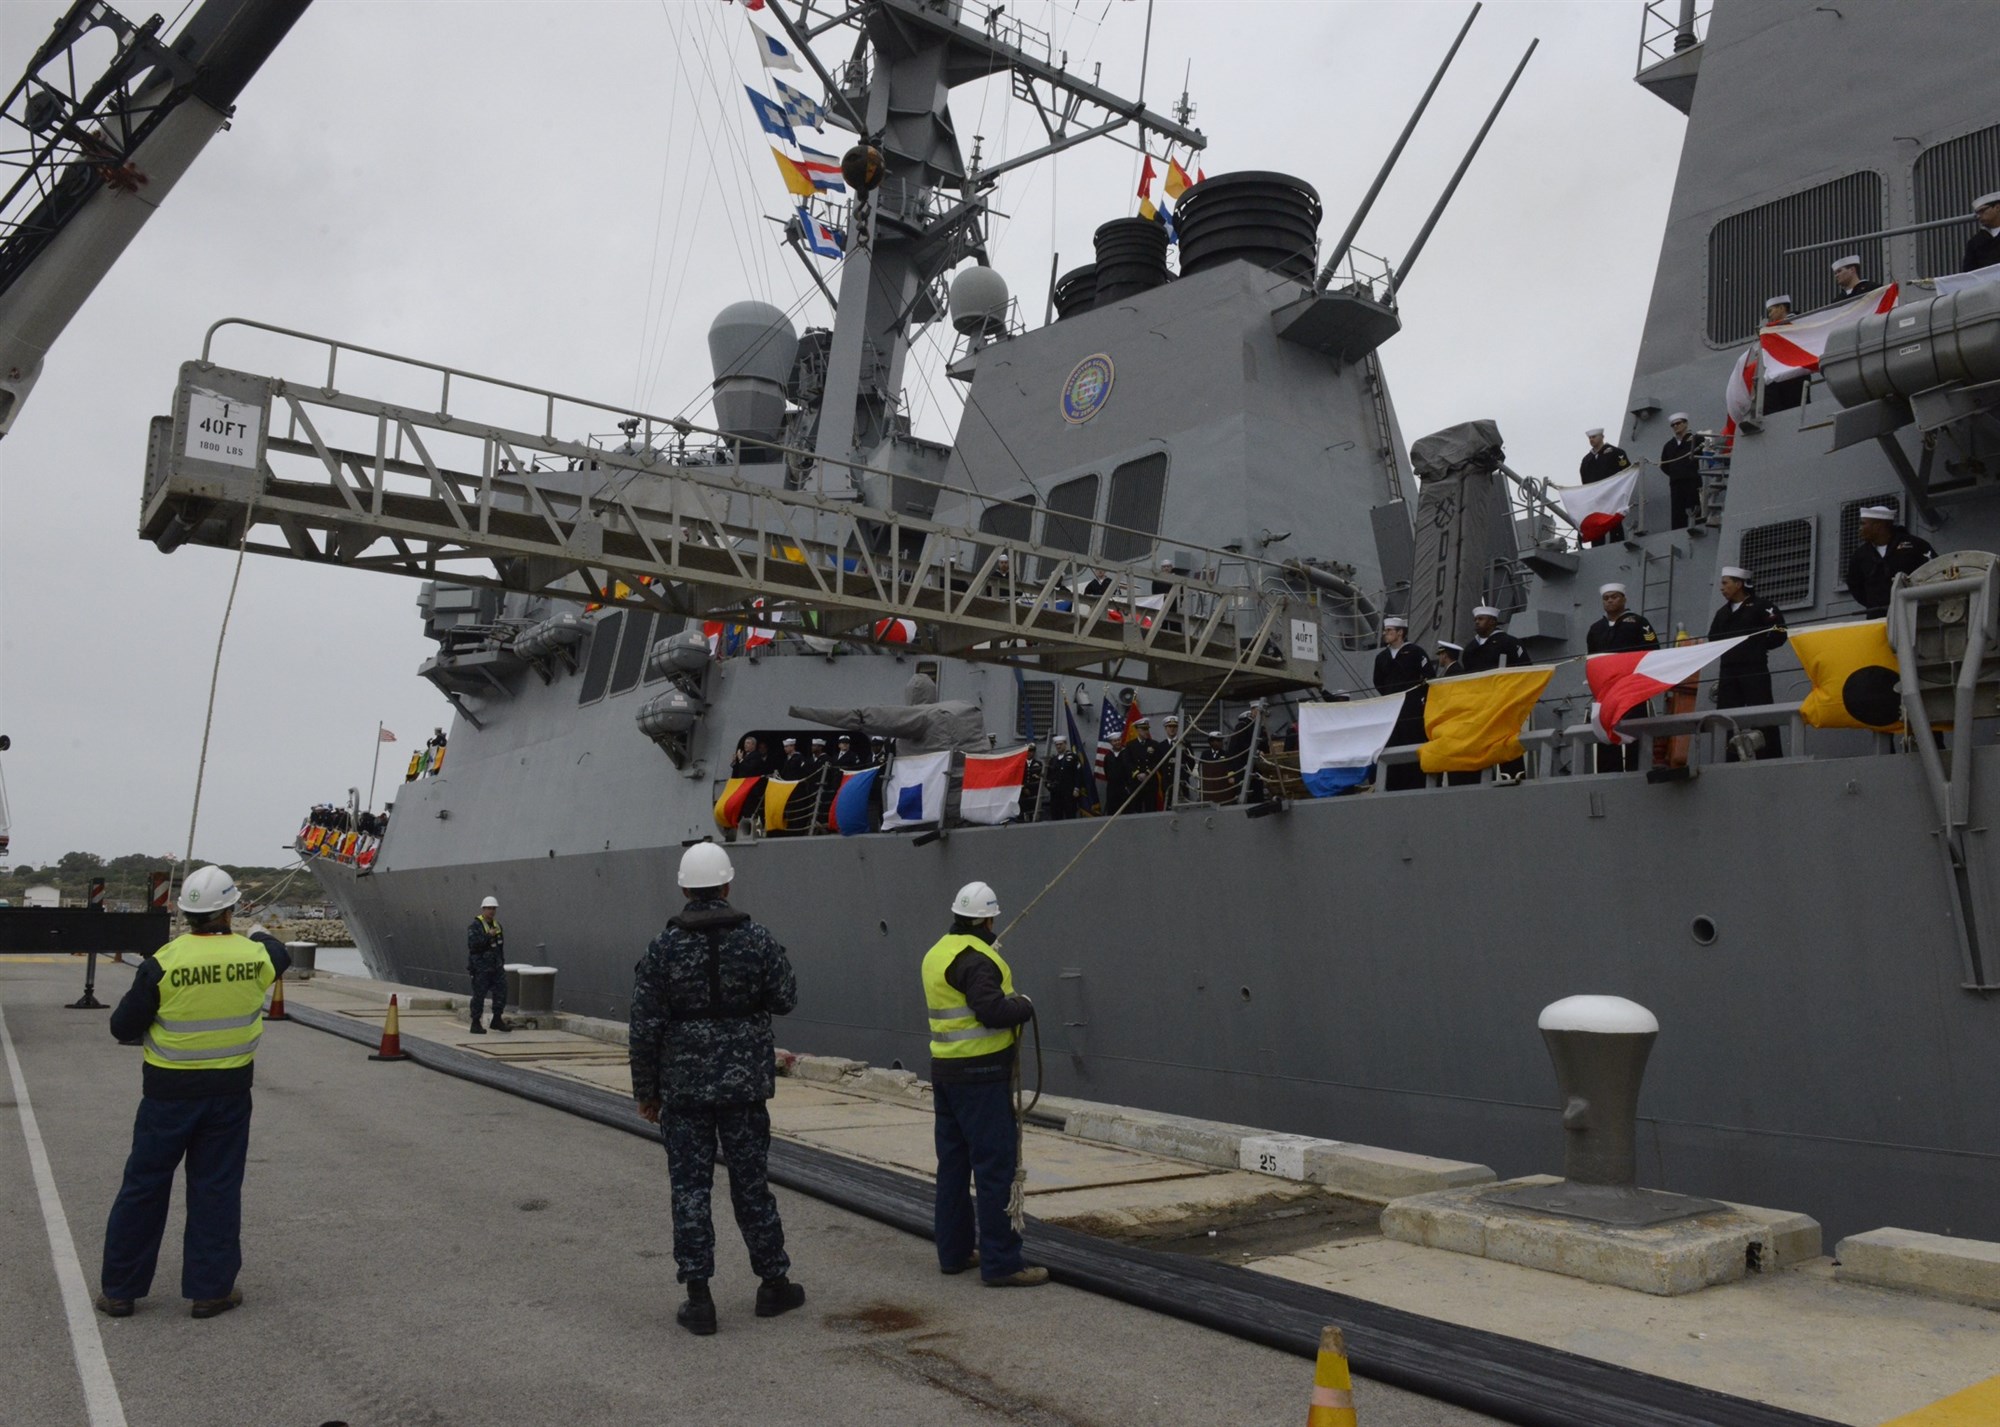 ROTA, Spain (Feb. 11, 2014) Sailors aboard the guided-missile destroyer USS Donald Cook (DDG 75) man the rails as the ship arrives in Rota, Spain. Donald Cook is the first of four Arleigh Burke-class guided-missile destroyers to be stationed in Rota. 